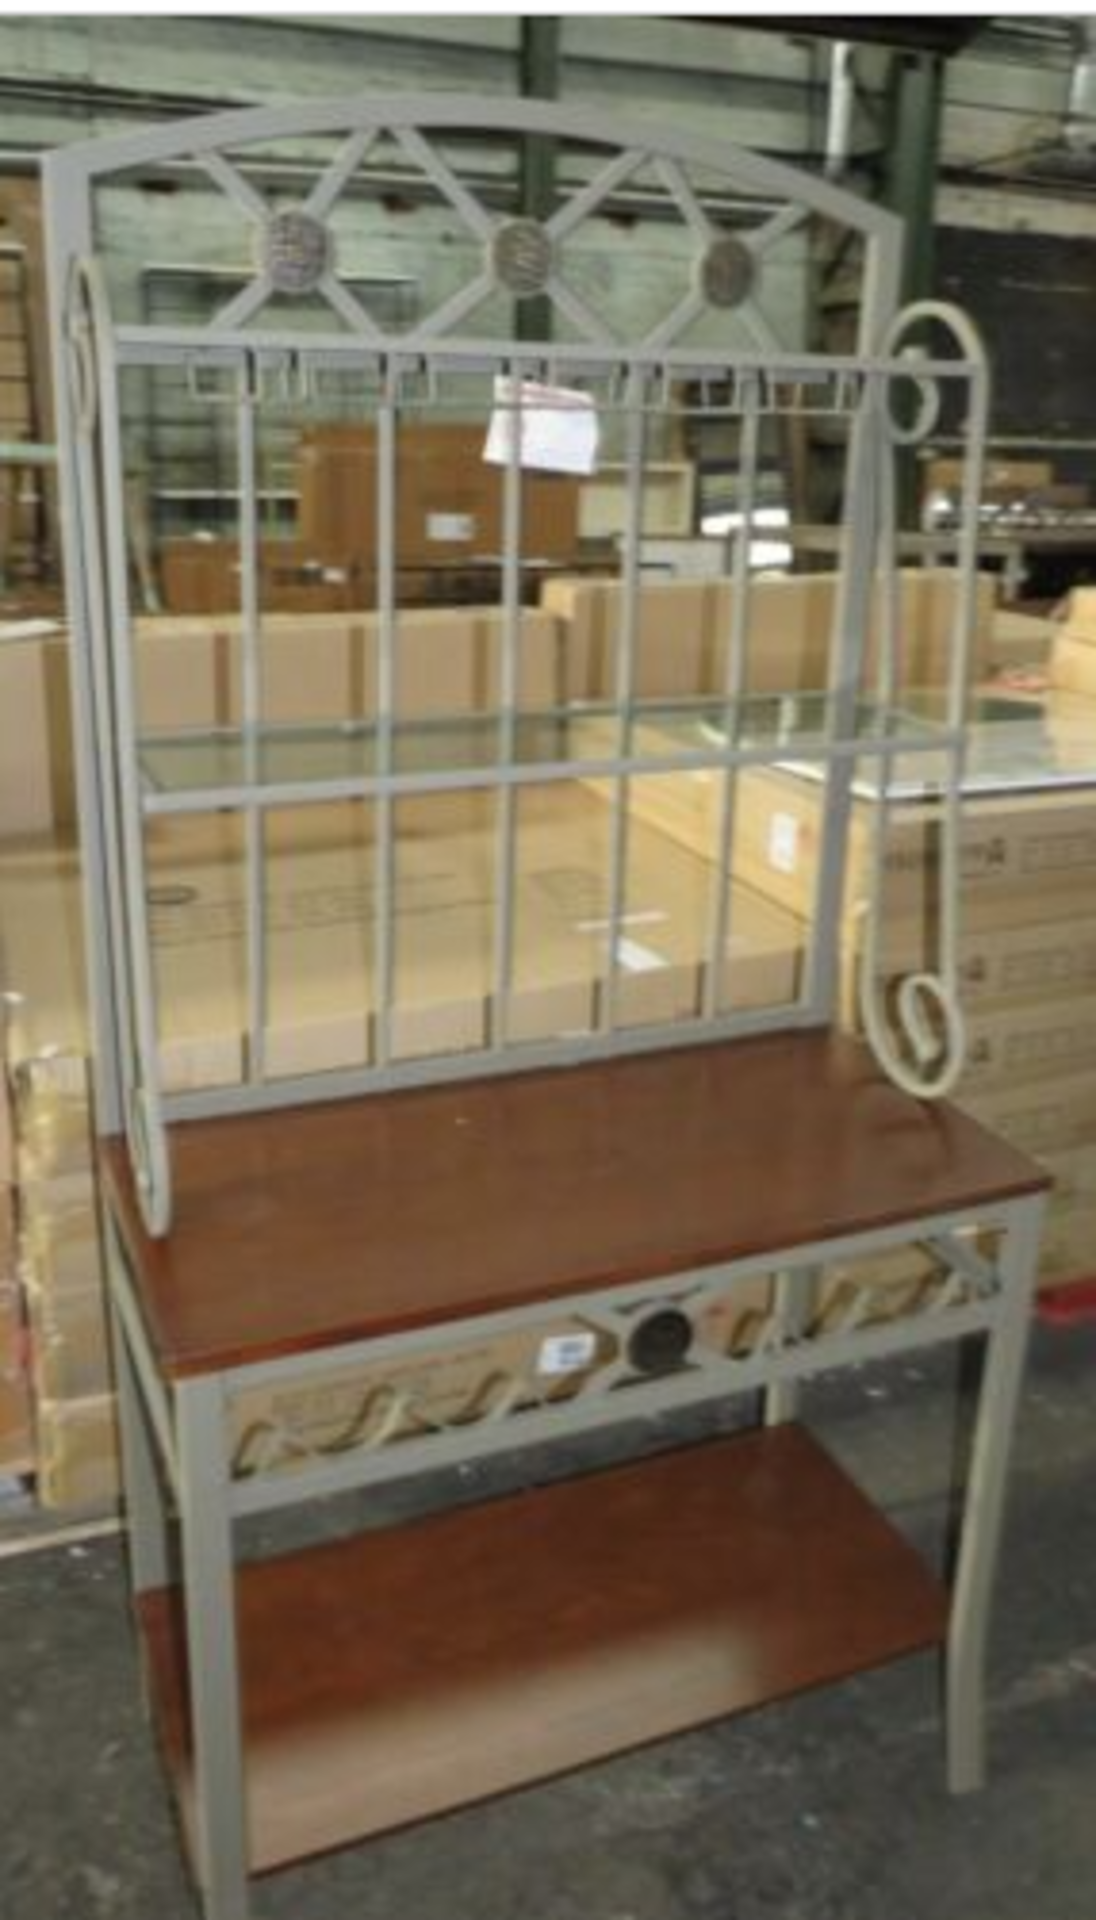 Mixed Lot of 6 x New SEI Furniture overstock - Total RRP approx 939.94 Includes: SEI Furniture - Image 2 of 7